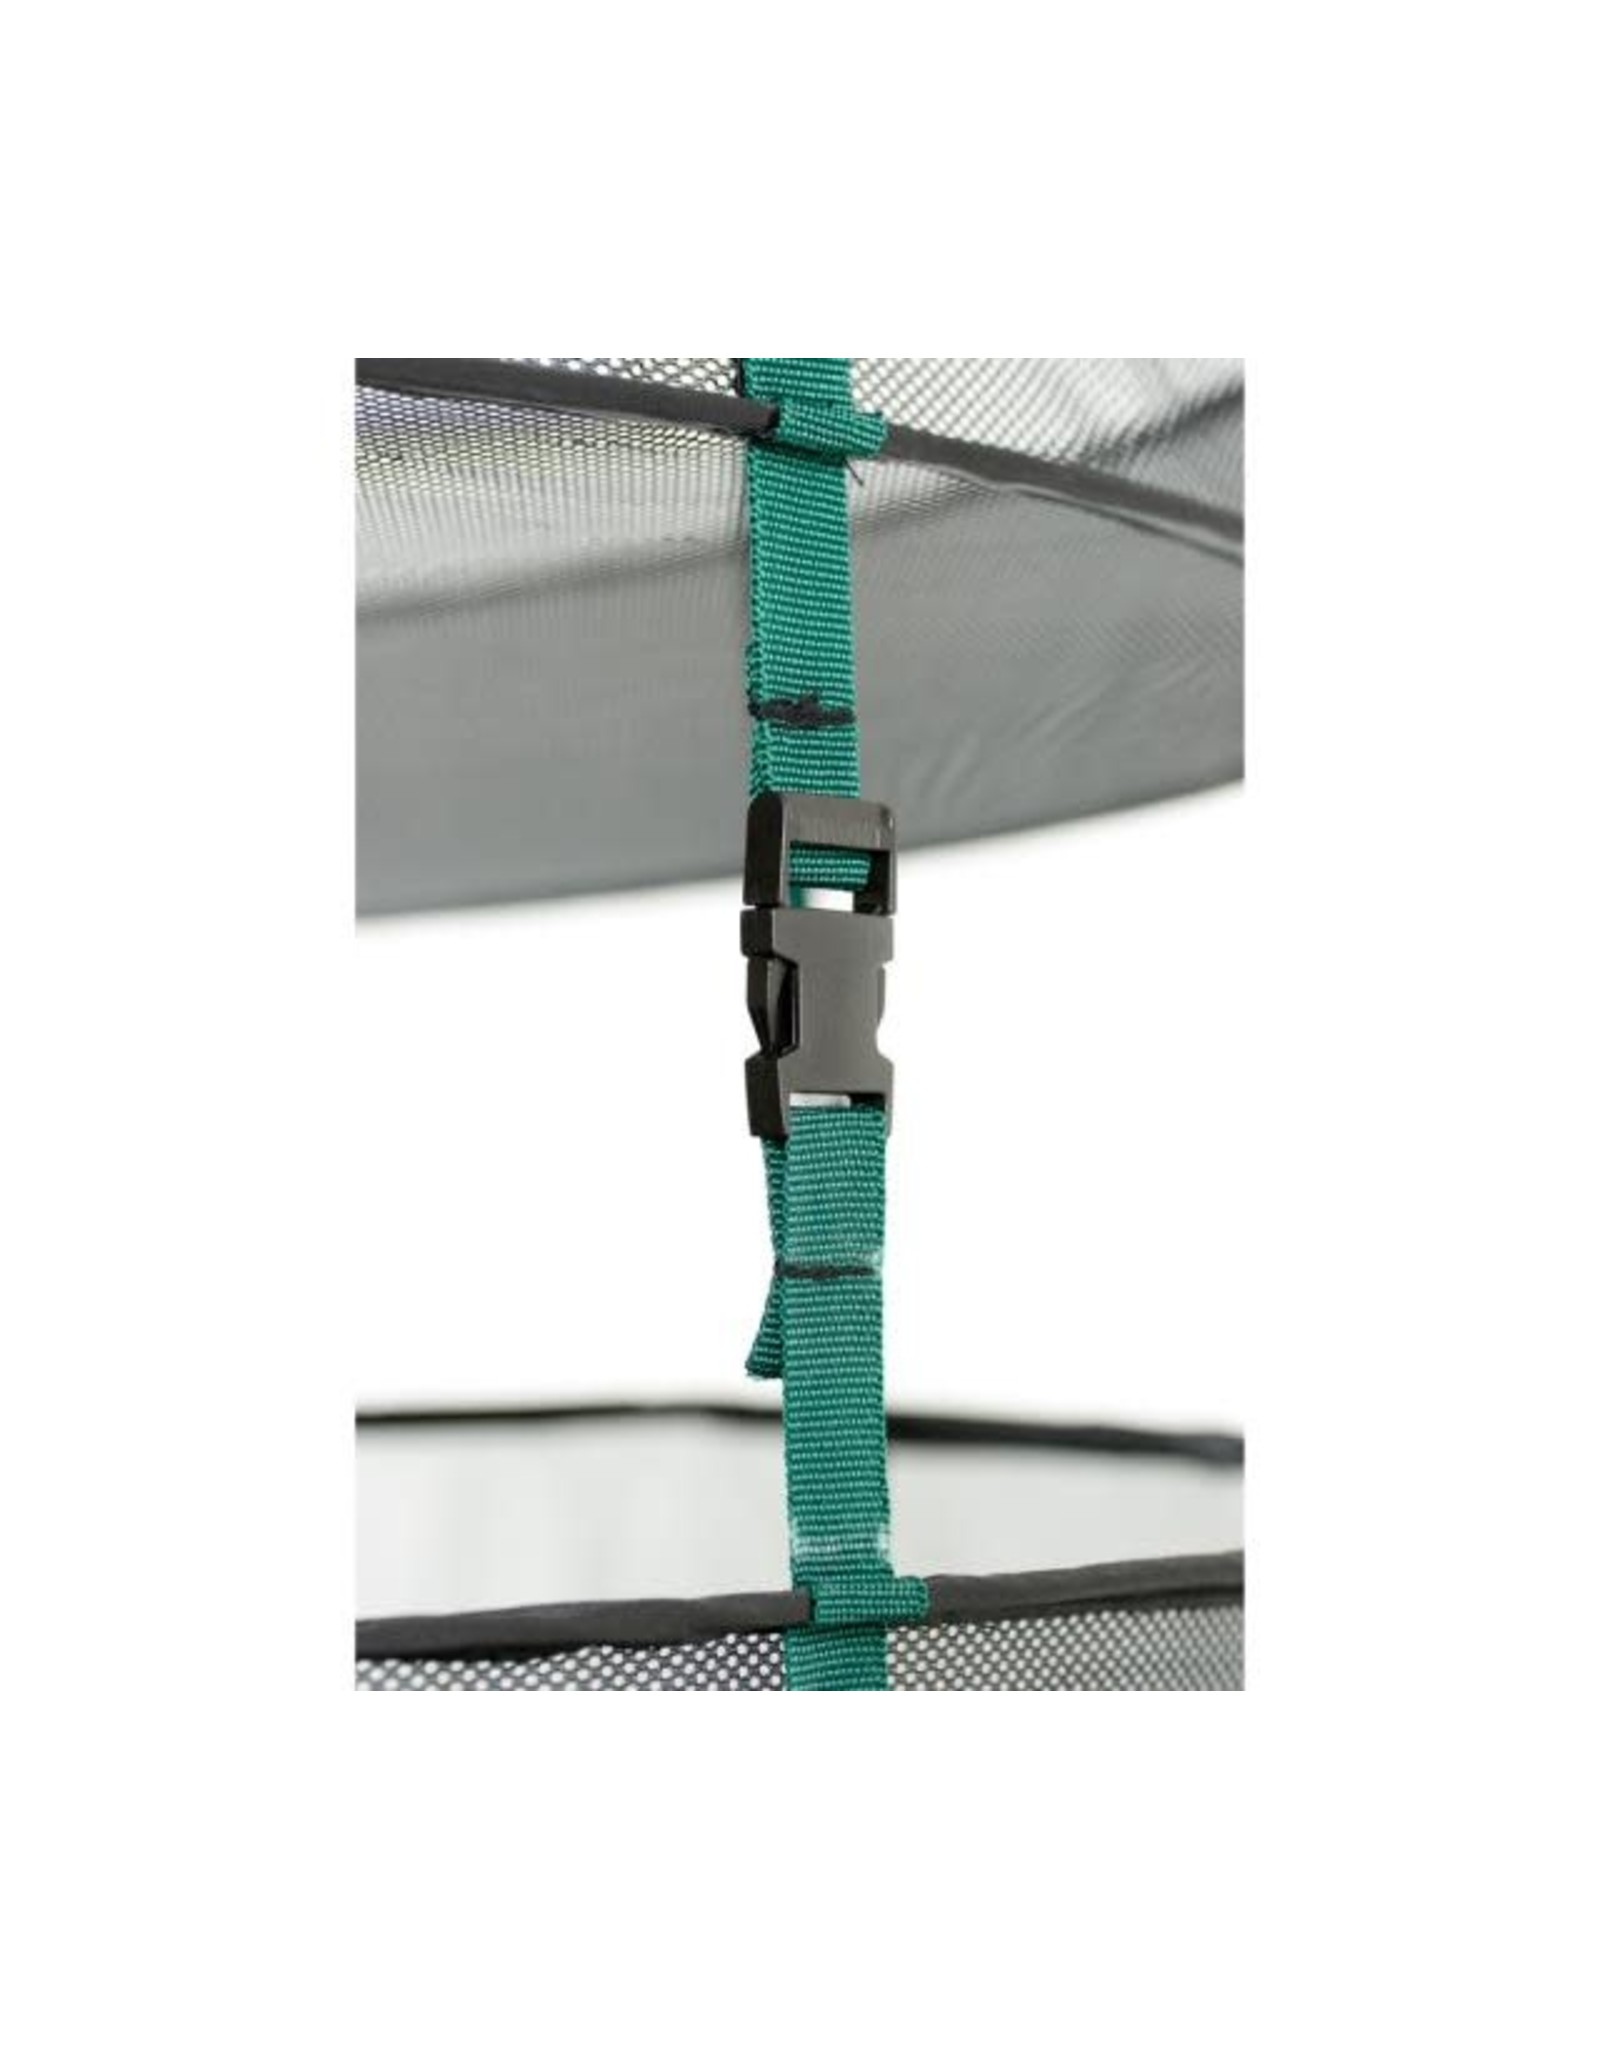 STACK!T STACK!T Drying Rack w/Clips, 3 ft - Now With Center Support Strap